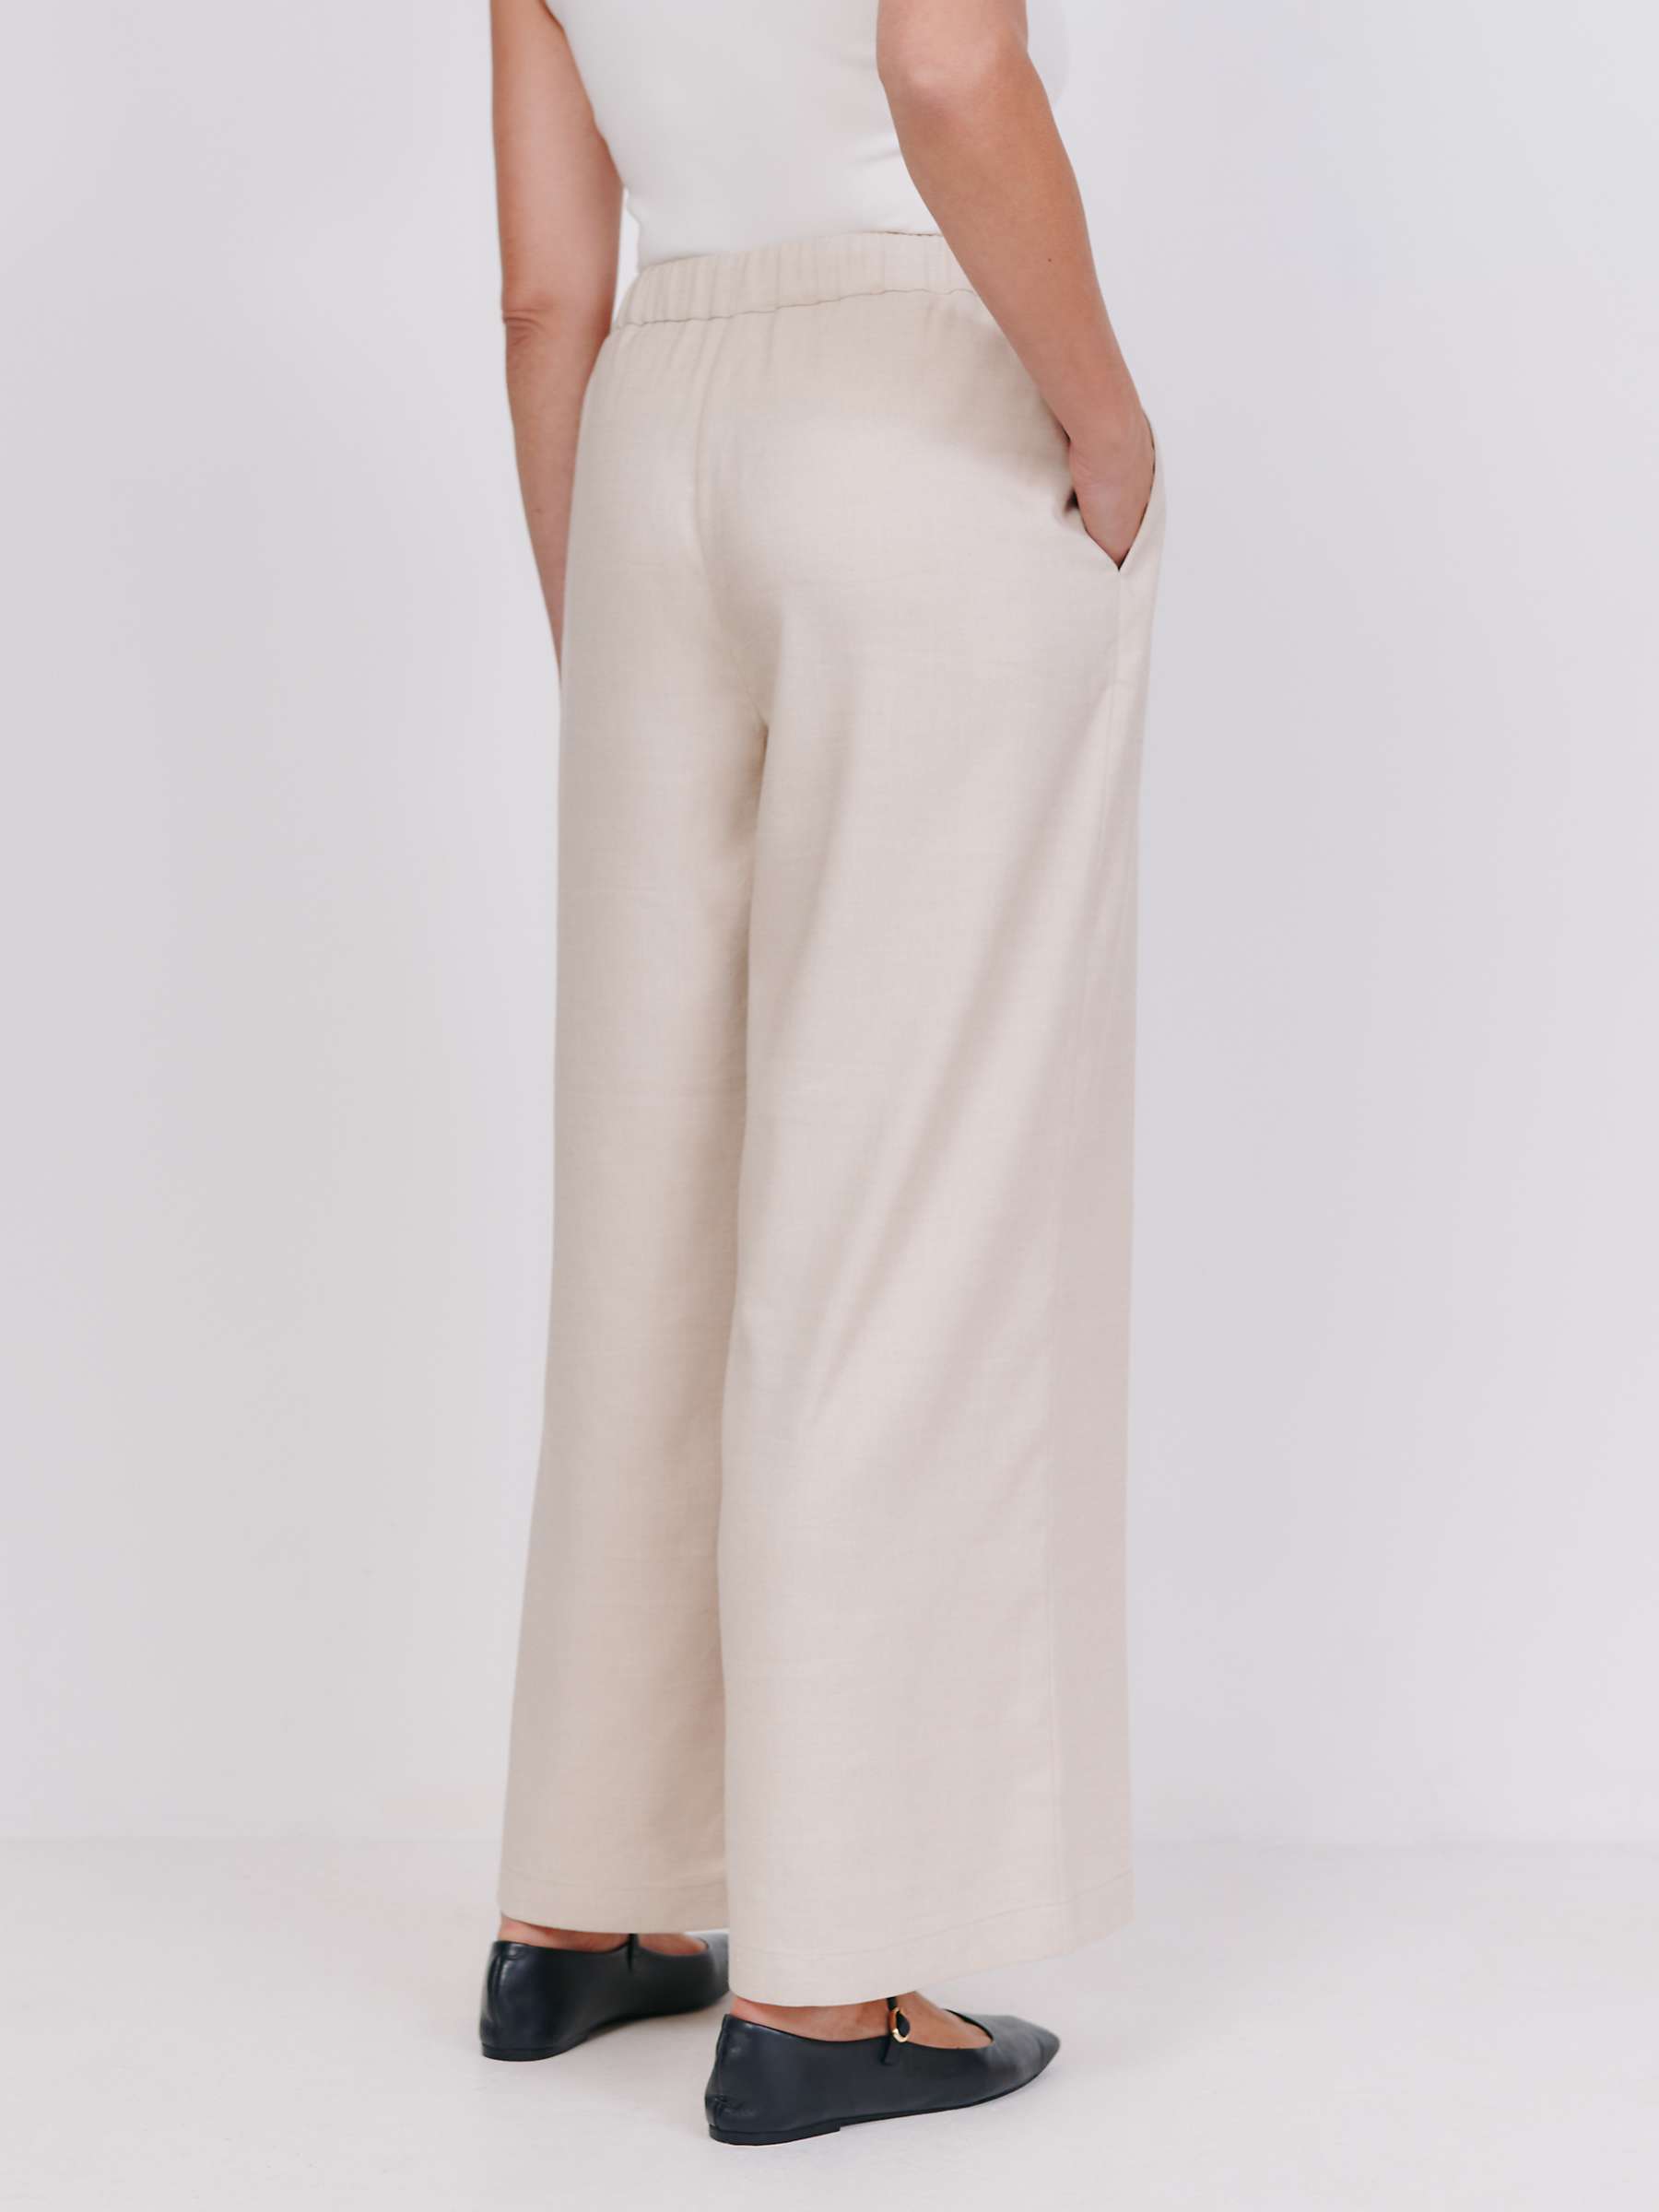 Buy Vivere By Savannah Miller Julian Linen Palazzo Trousers, Oatmeal Online at johnlewis.com